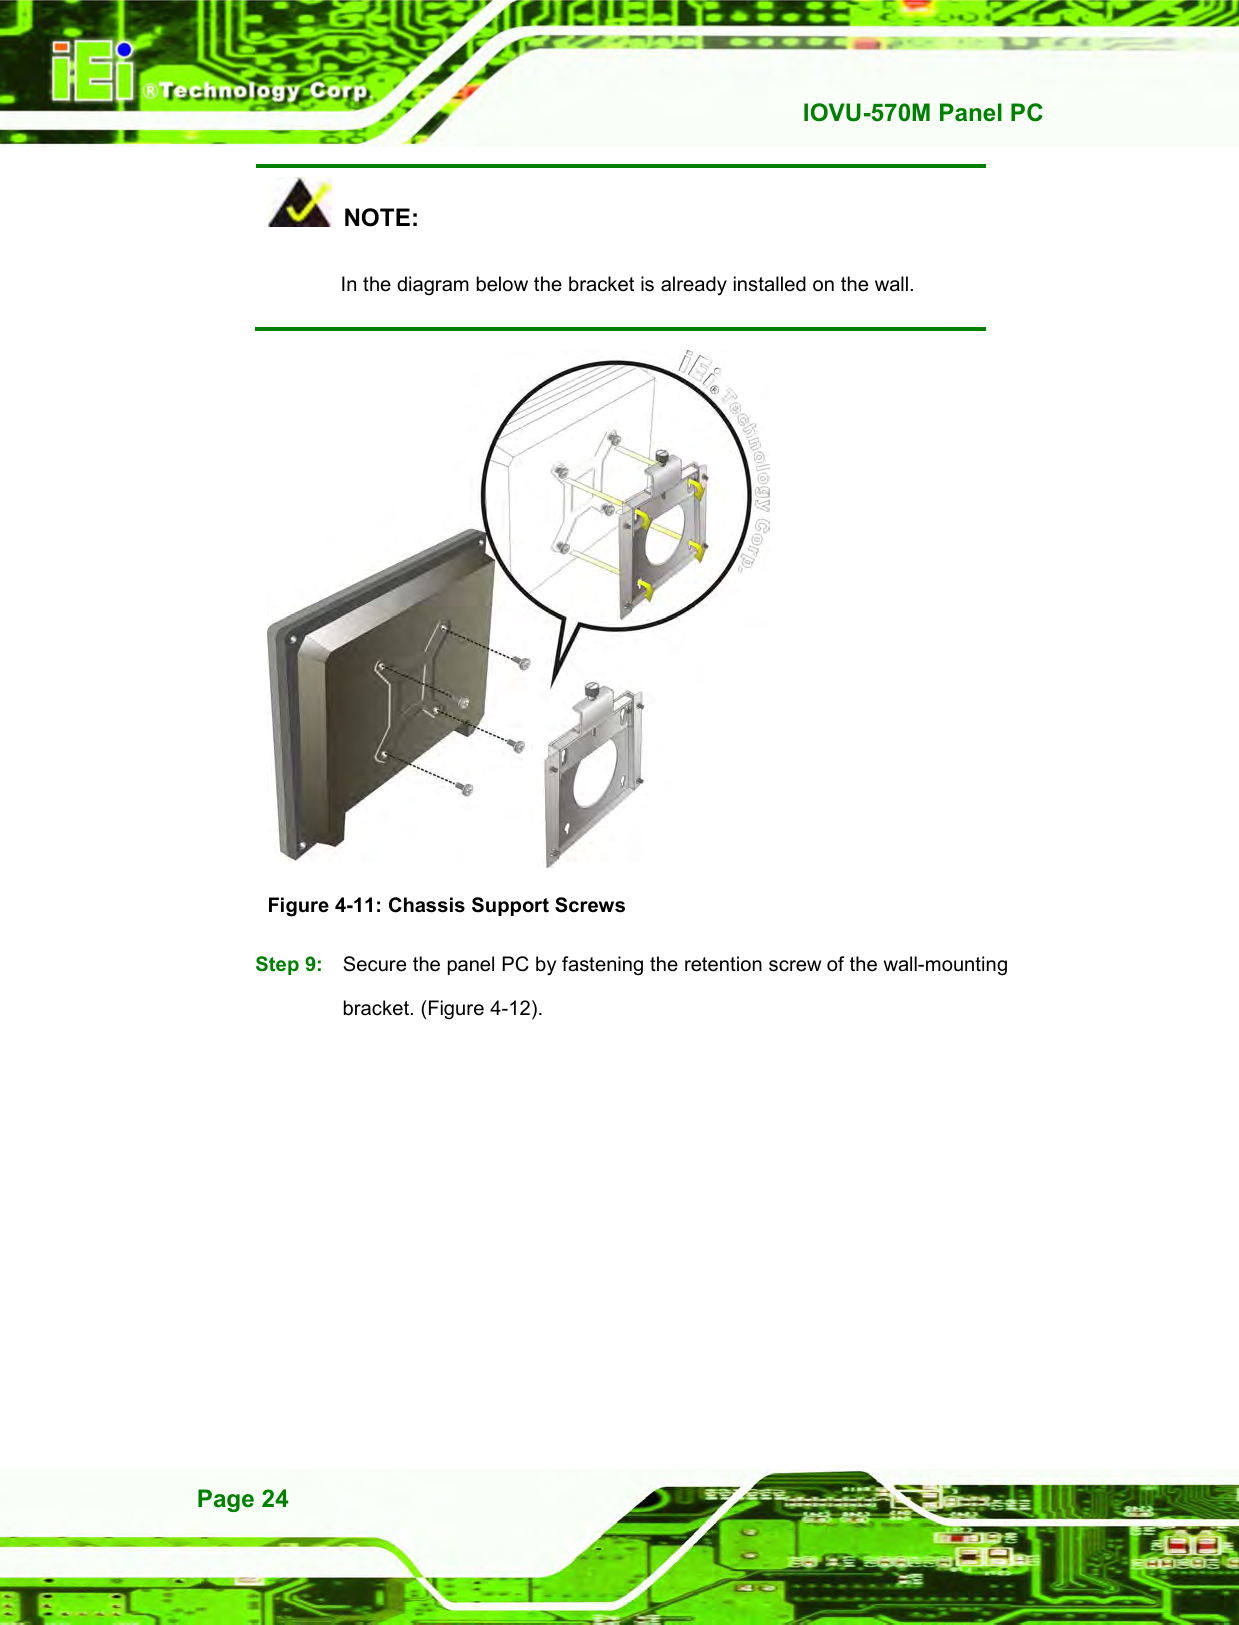   IOVU-570M Panel PC Page 24   NOTE: In the diagram below the bracket is already installed on the wall.     Figure 4-11: Chassis Support Screws Step 9:  Secure the panel PC by fastening the retention screw of the wall-mounting bracket. (Figure 4-12). Step 0: 